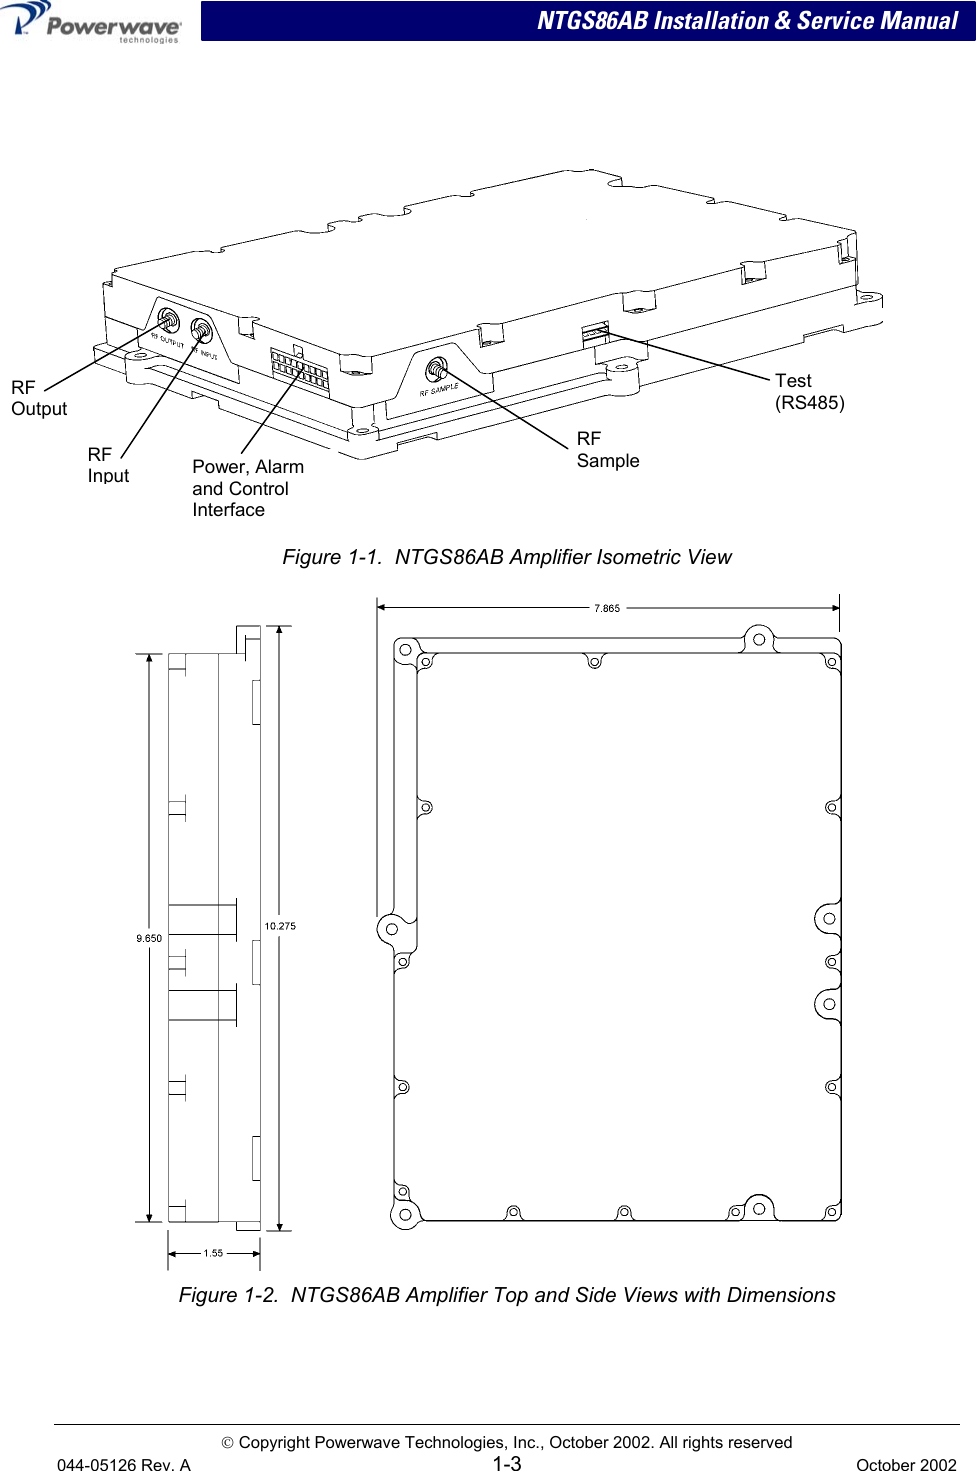   NTGS86AB Installation &amp; Service Manual     Power, Alarm and Control Interface RF Output RF Input   RF SampleTest (RS485)  Figure 1-1.  NTGS86AB Amplifier Isometric View  Figure 1-2.  NTGS86AB Amplifier Top and Side Views with Dimensions  Copyright Powerwave Technologies, Inc., October 2002. All rights reserved 044-05126 Rev. A 1-3  October 2002  